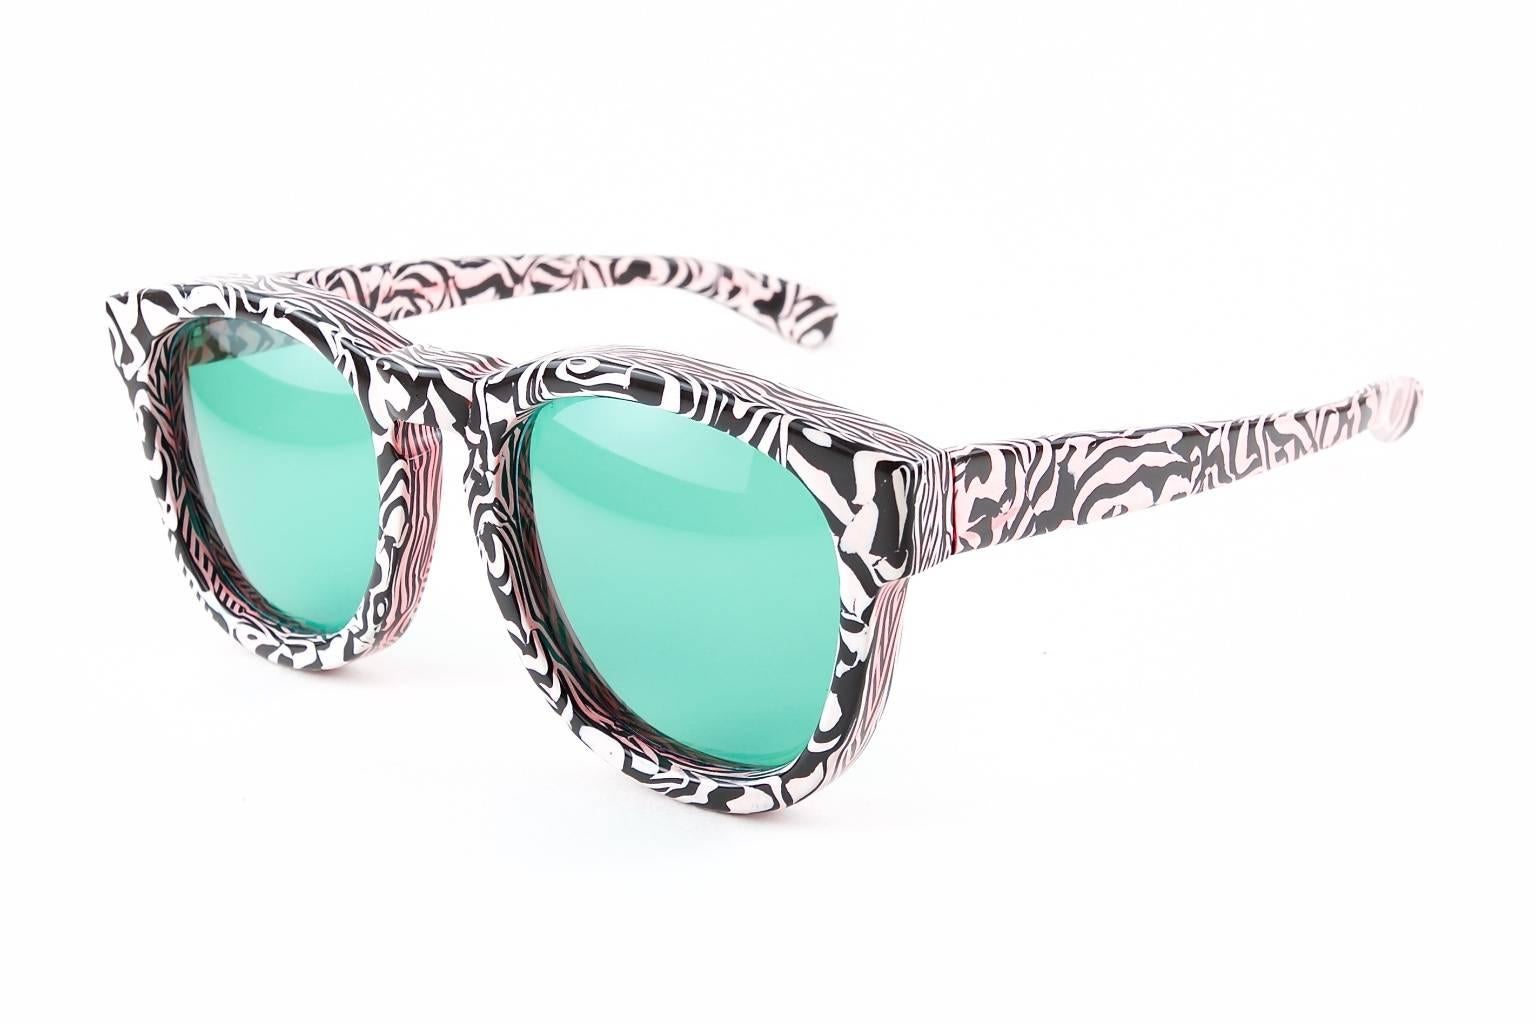 1970s vintage square sunglasses. This shaped frame has a beautiful black and white coloured acetate with well placed light streaks running through. A keyhole shaped bridge also enhances the vintage look of this frame. The frame is in very good